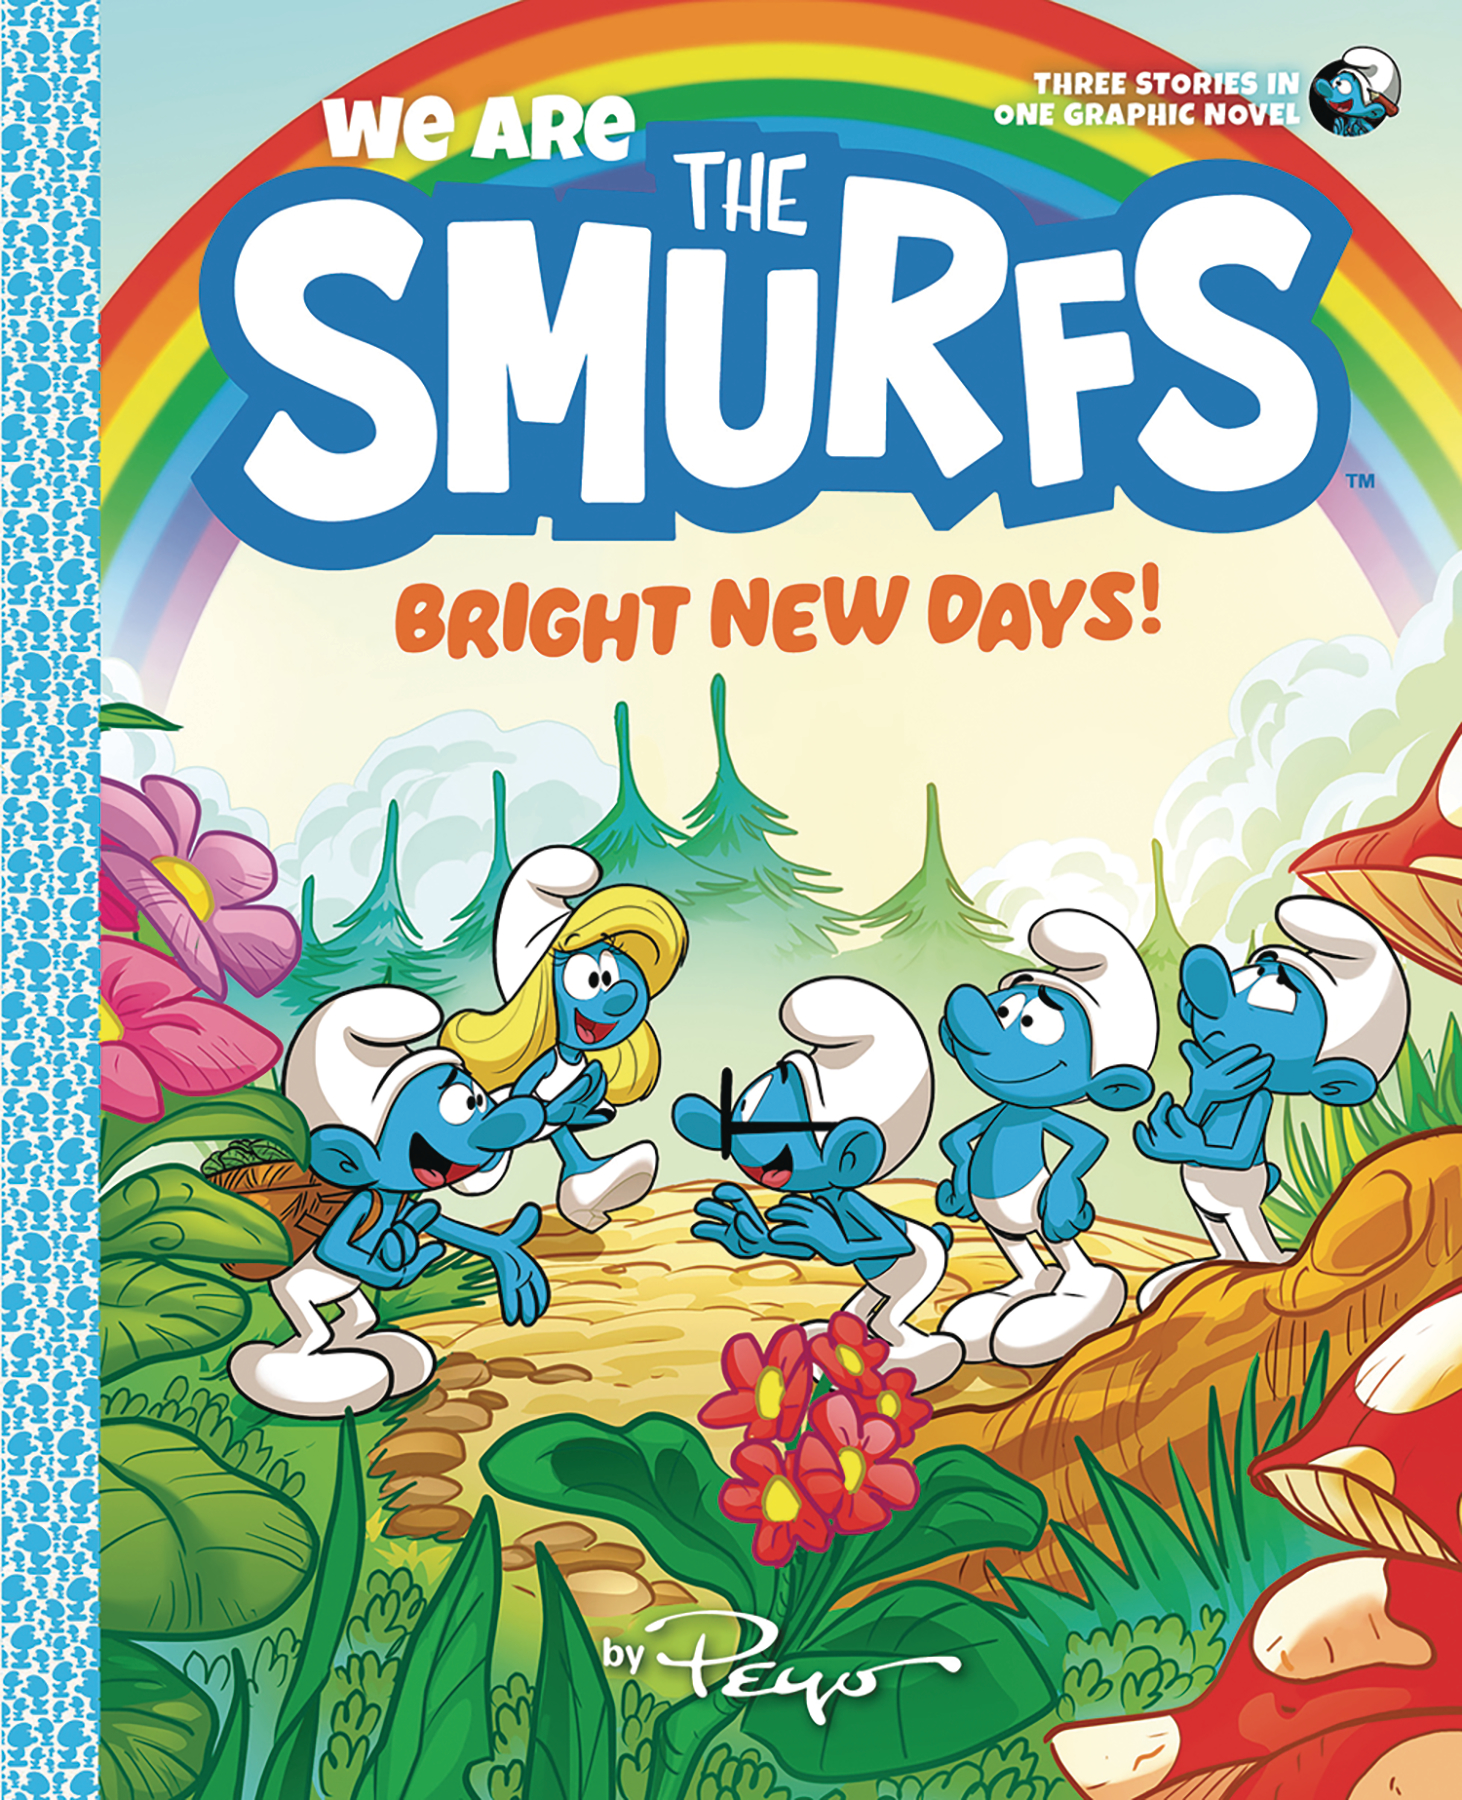 We Are the Smurfs Graphic Novel Volume 3 Bright New Days